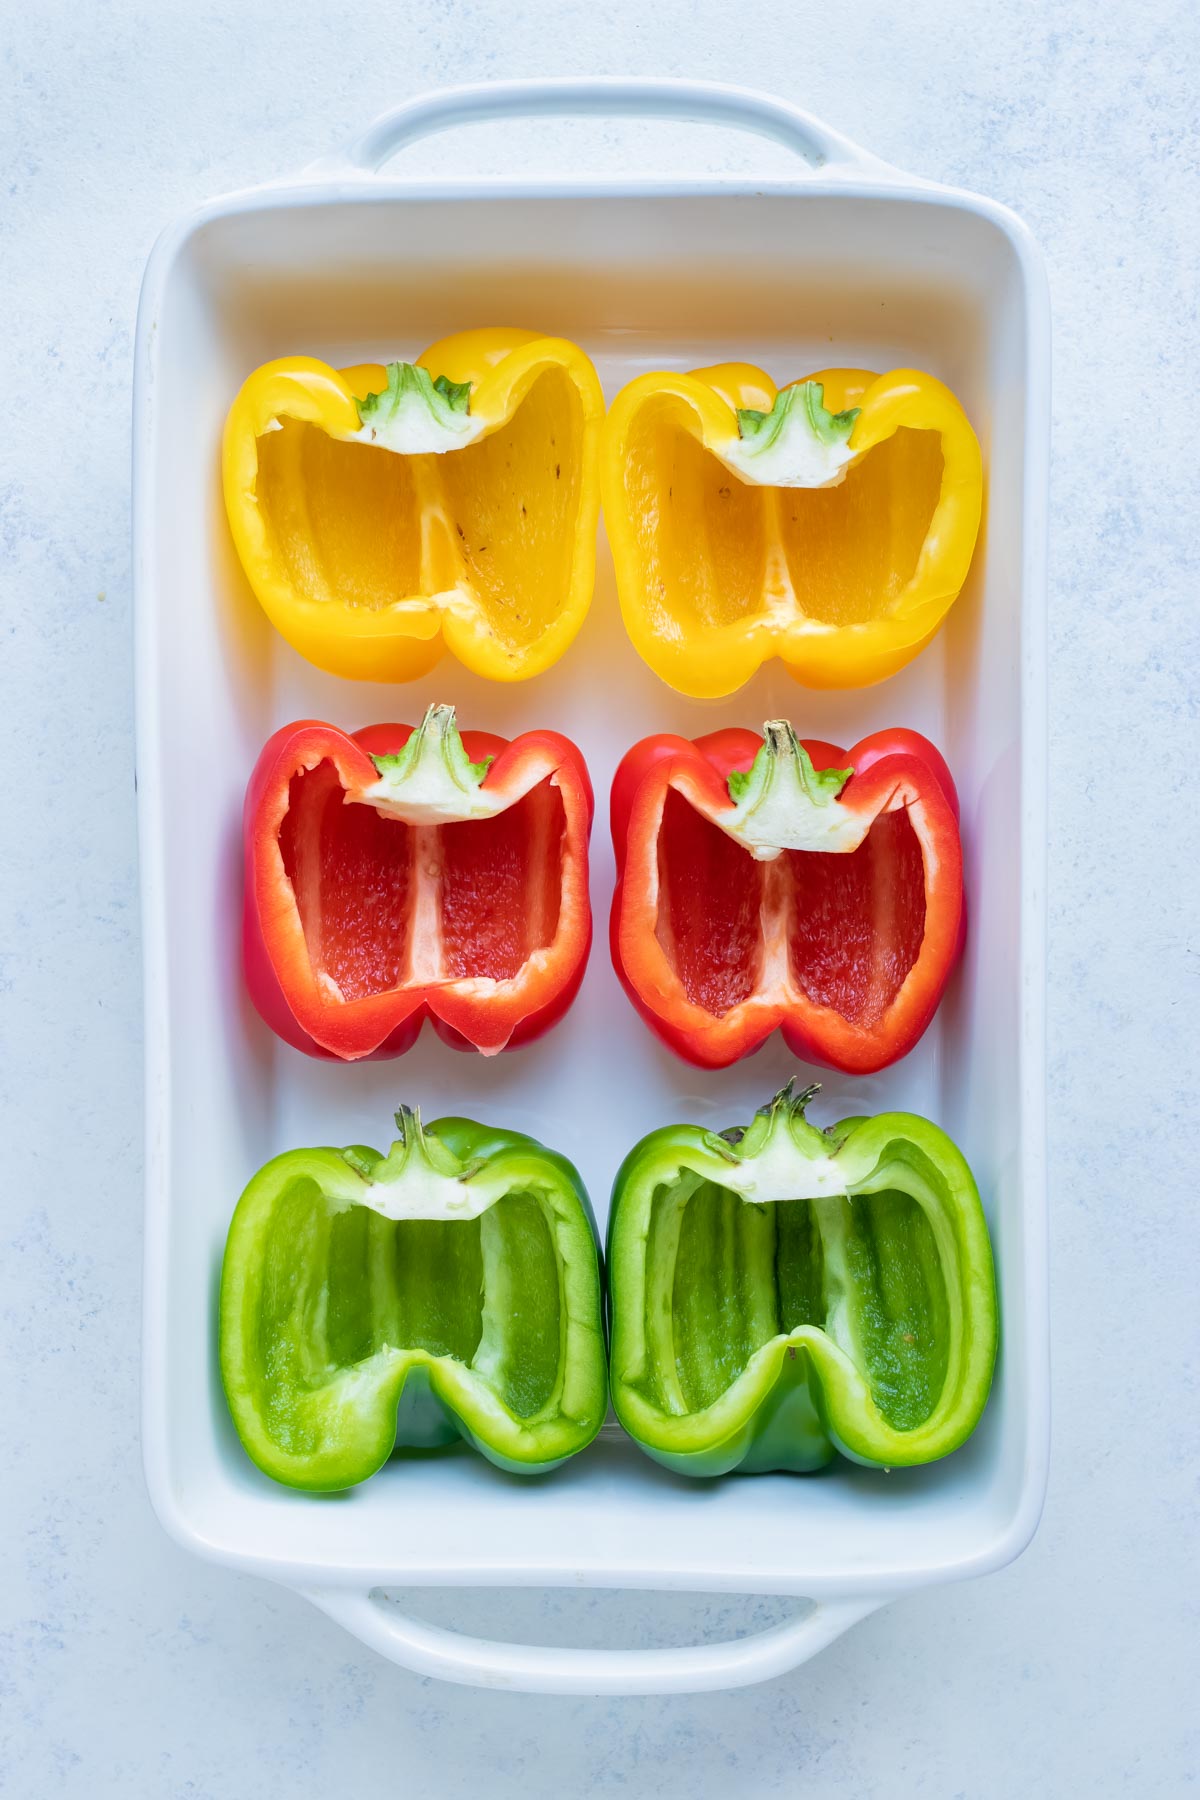 The bell peppers are lined in a baking dish before filling.